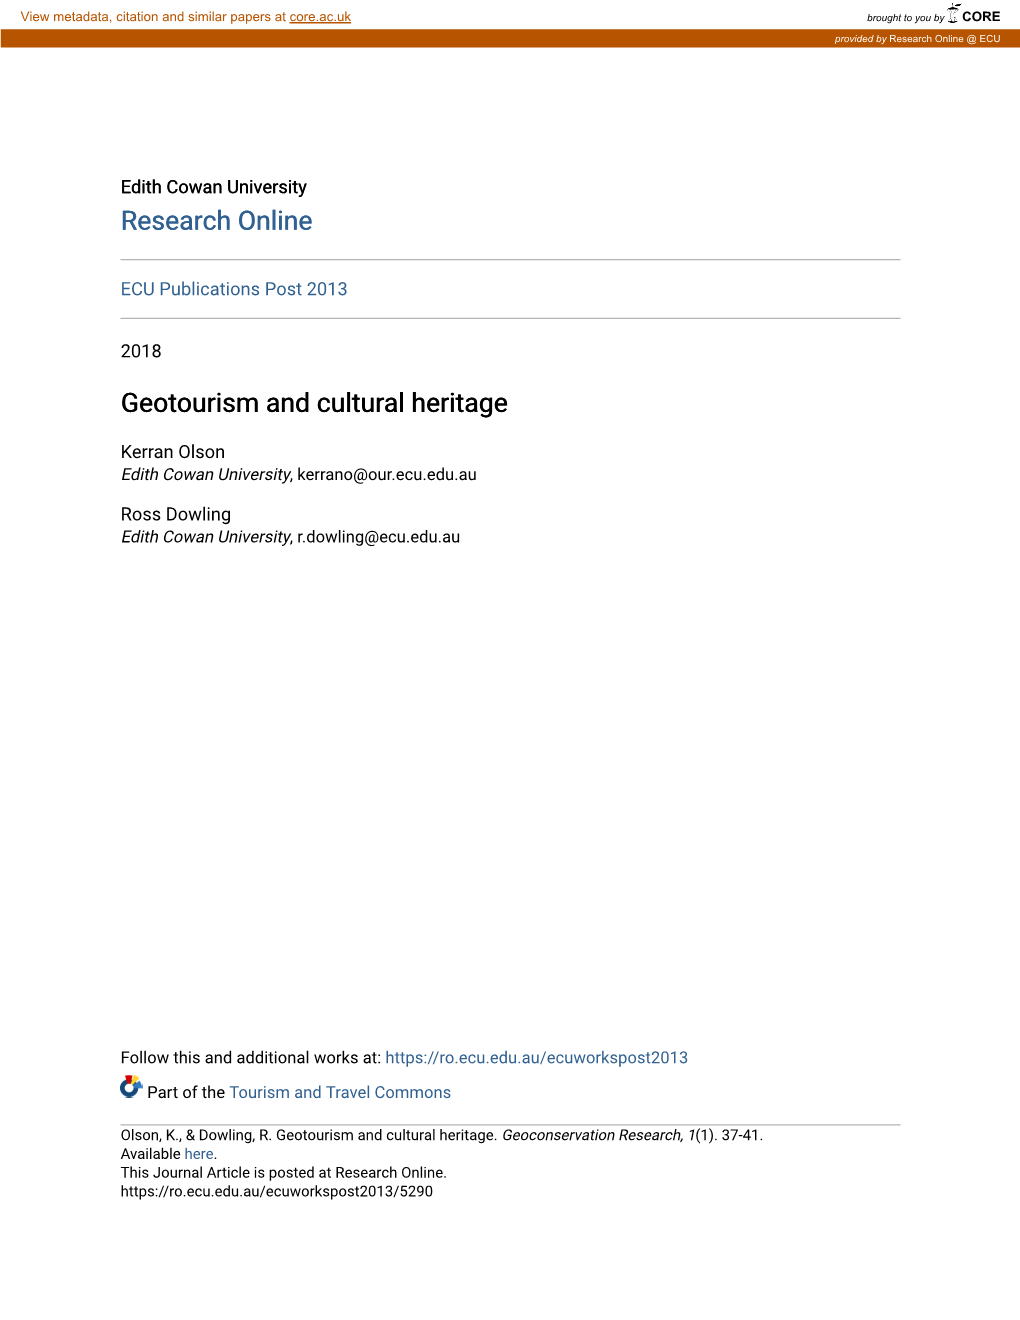 Geotourism and Cultural Heritage